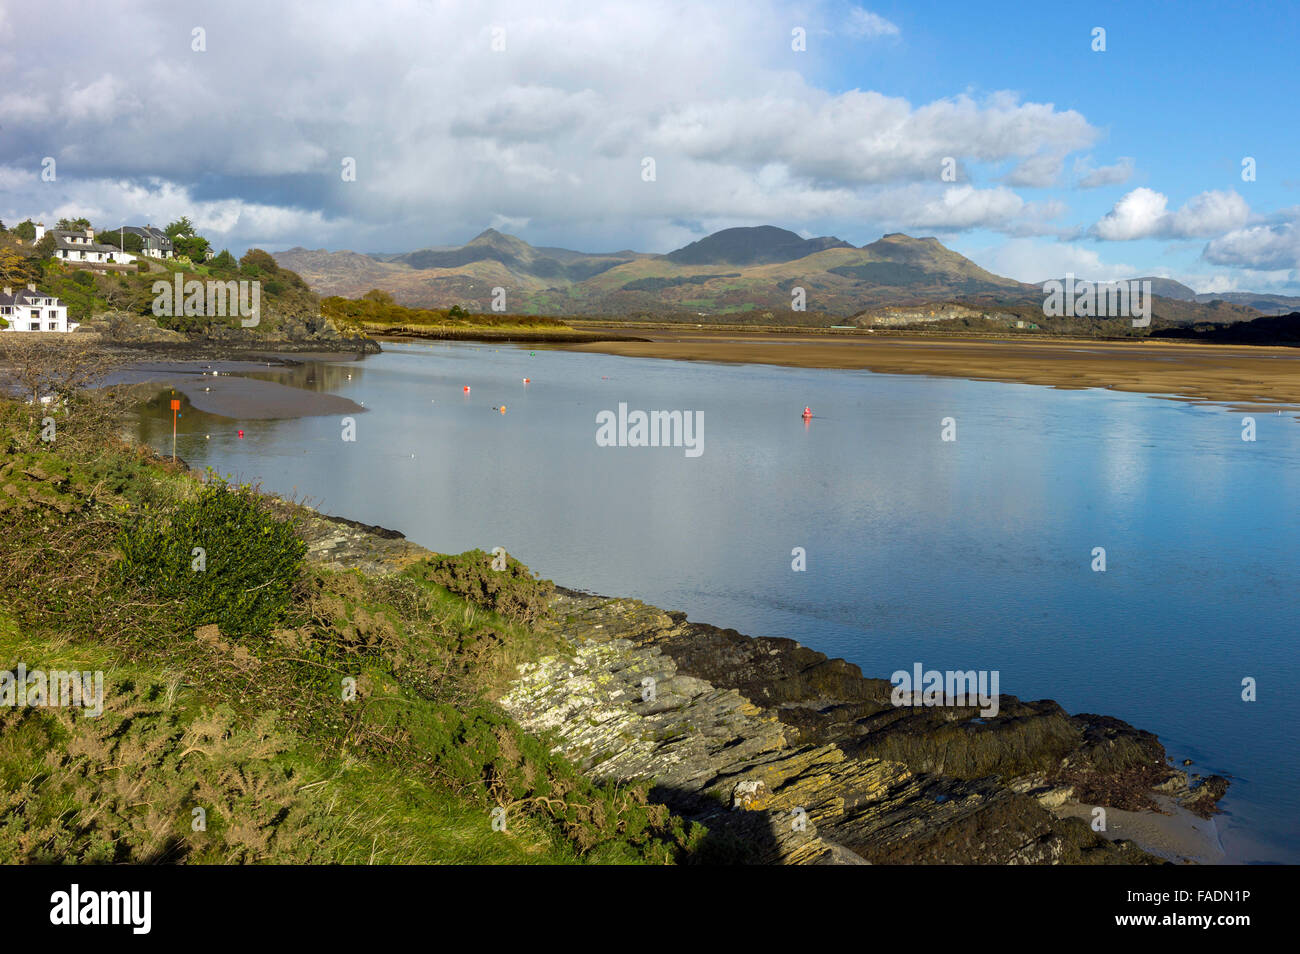 A view across the Glaslyn estuary near Both y Gest eastwards towards the Rhinog and Moelwyn mountains in the background. Stock Photo